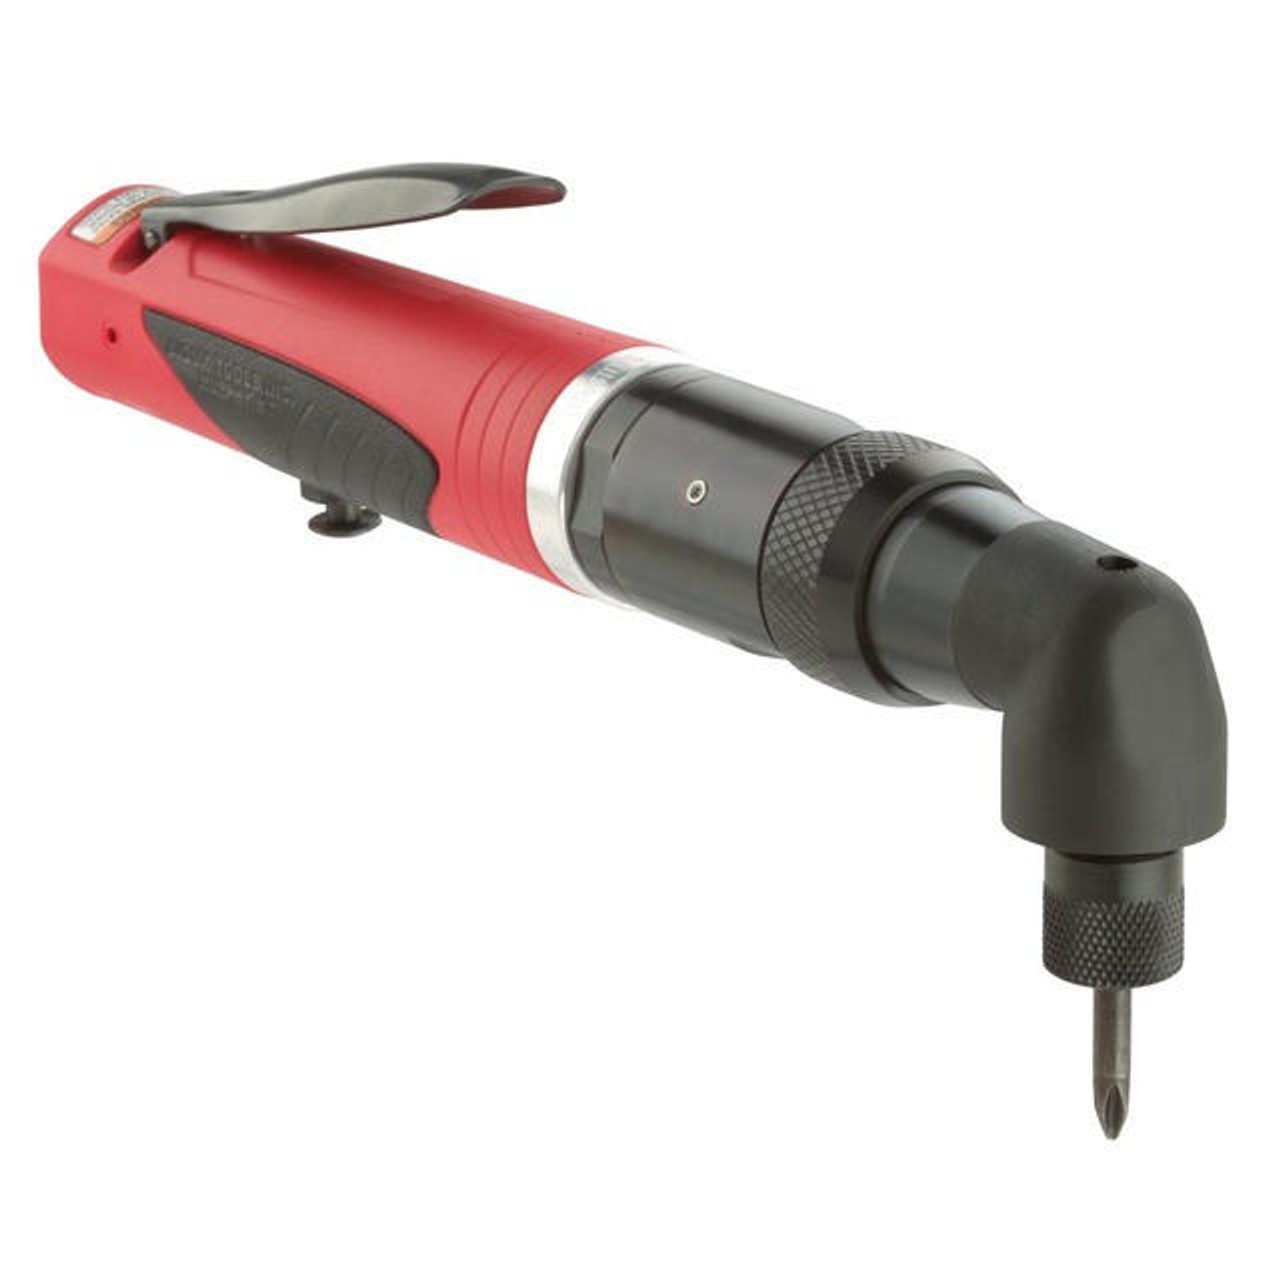  Sioux Tools SSD10A20S Stall Right Angle Screwdriver | 1/4" Quick Change | 2000 RPM | 58 in.-lb. Max Torque 